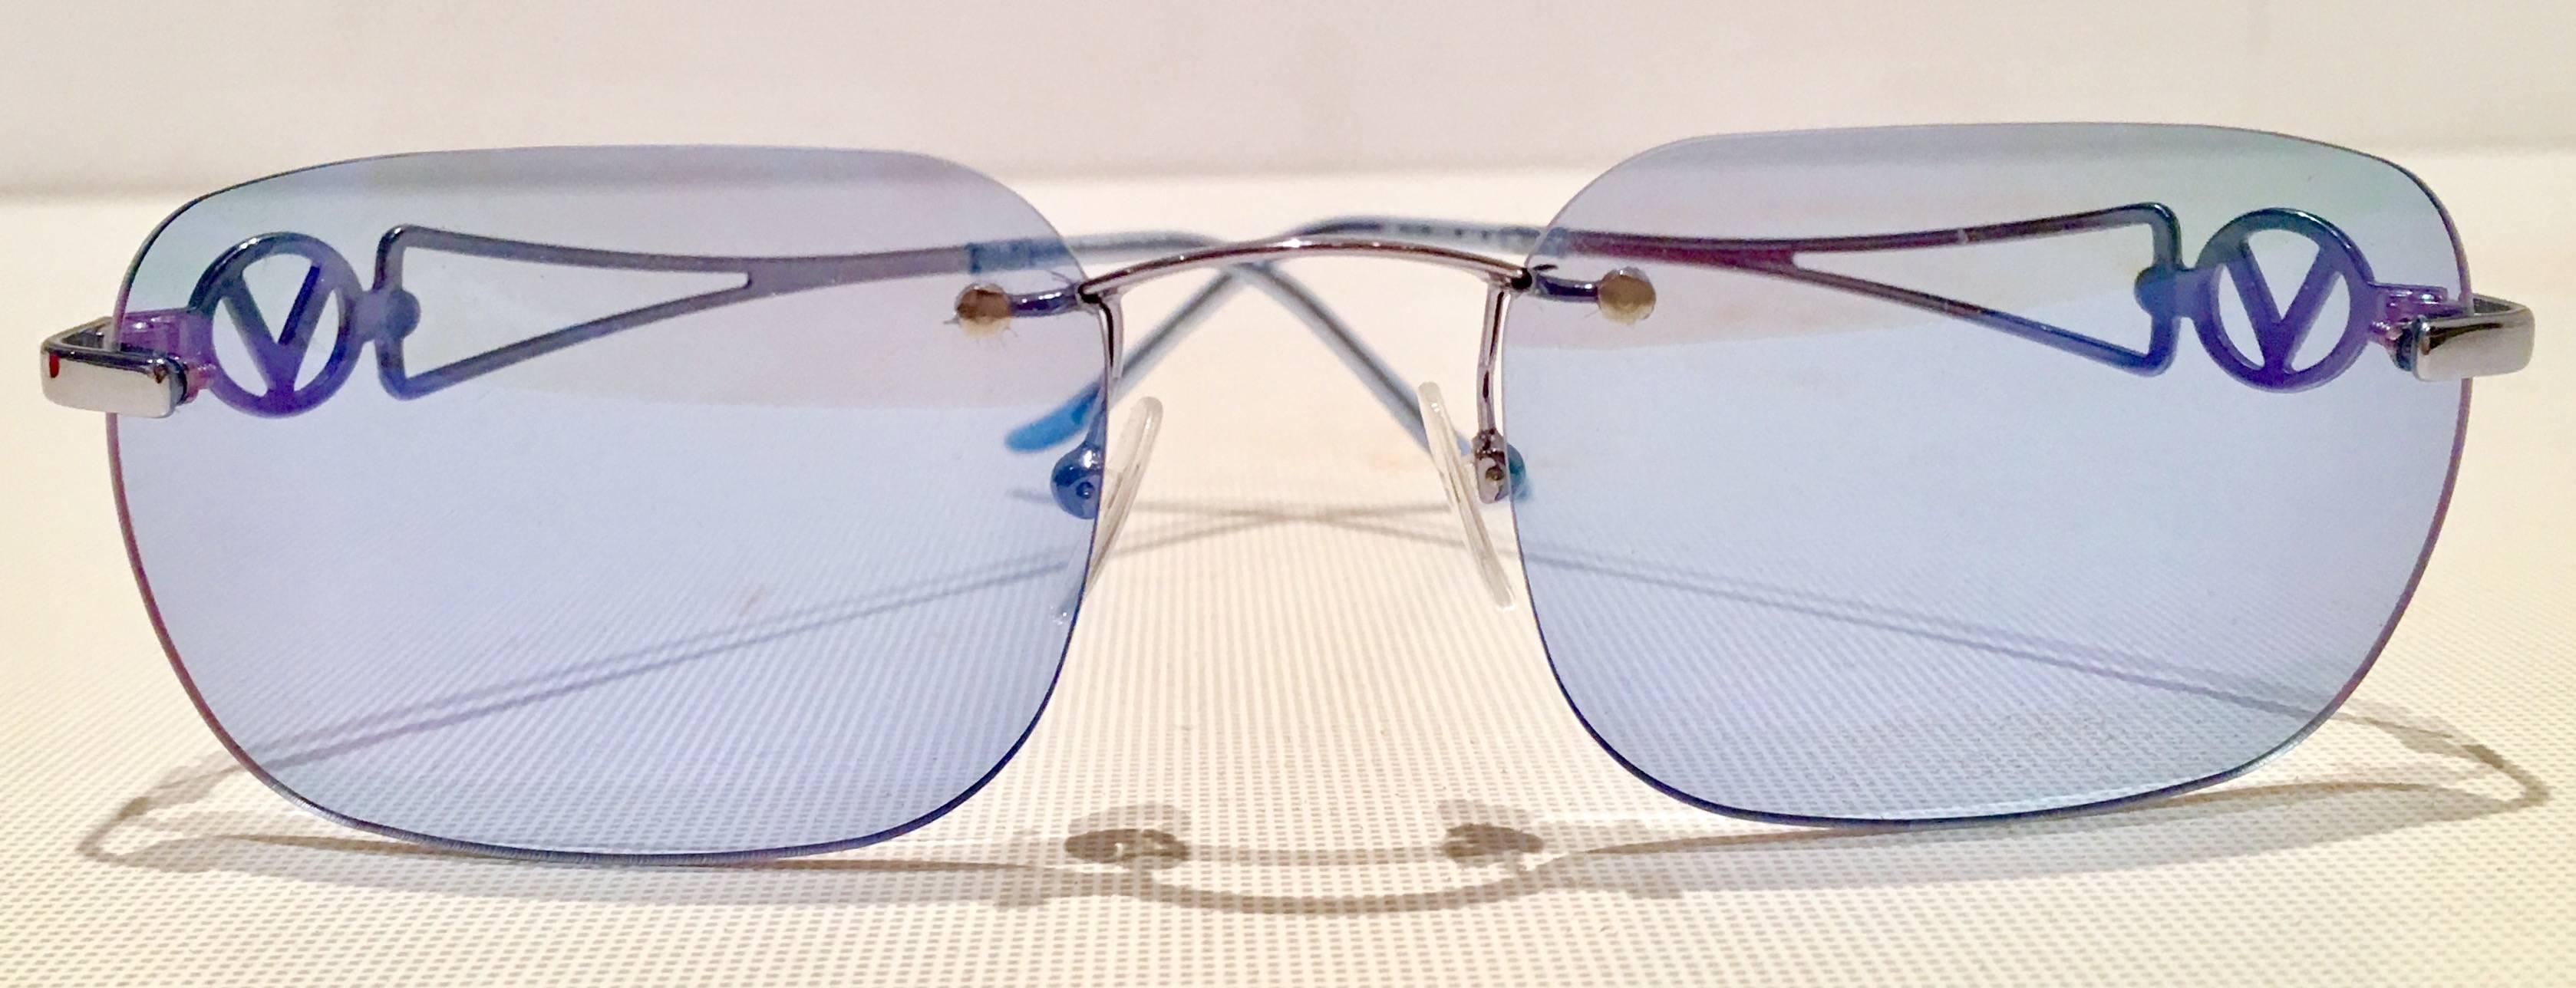 Cool & Contemporary Valentino lightweight blue "V" log sunglasses.Signed on interior arms,  A-130 Made In Italy 5251/S. Includes red Valentino protective storage case. 